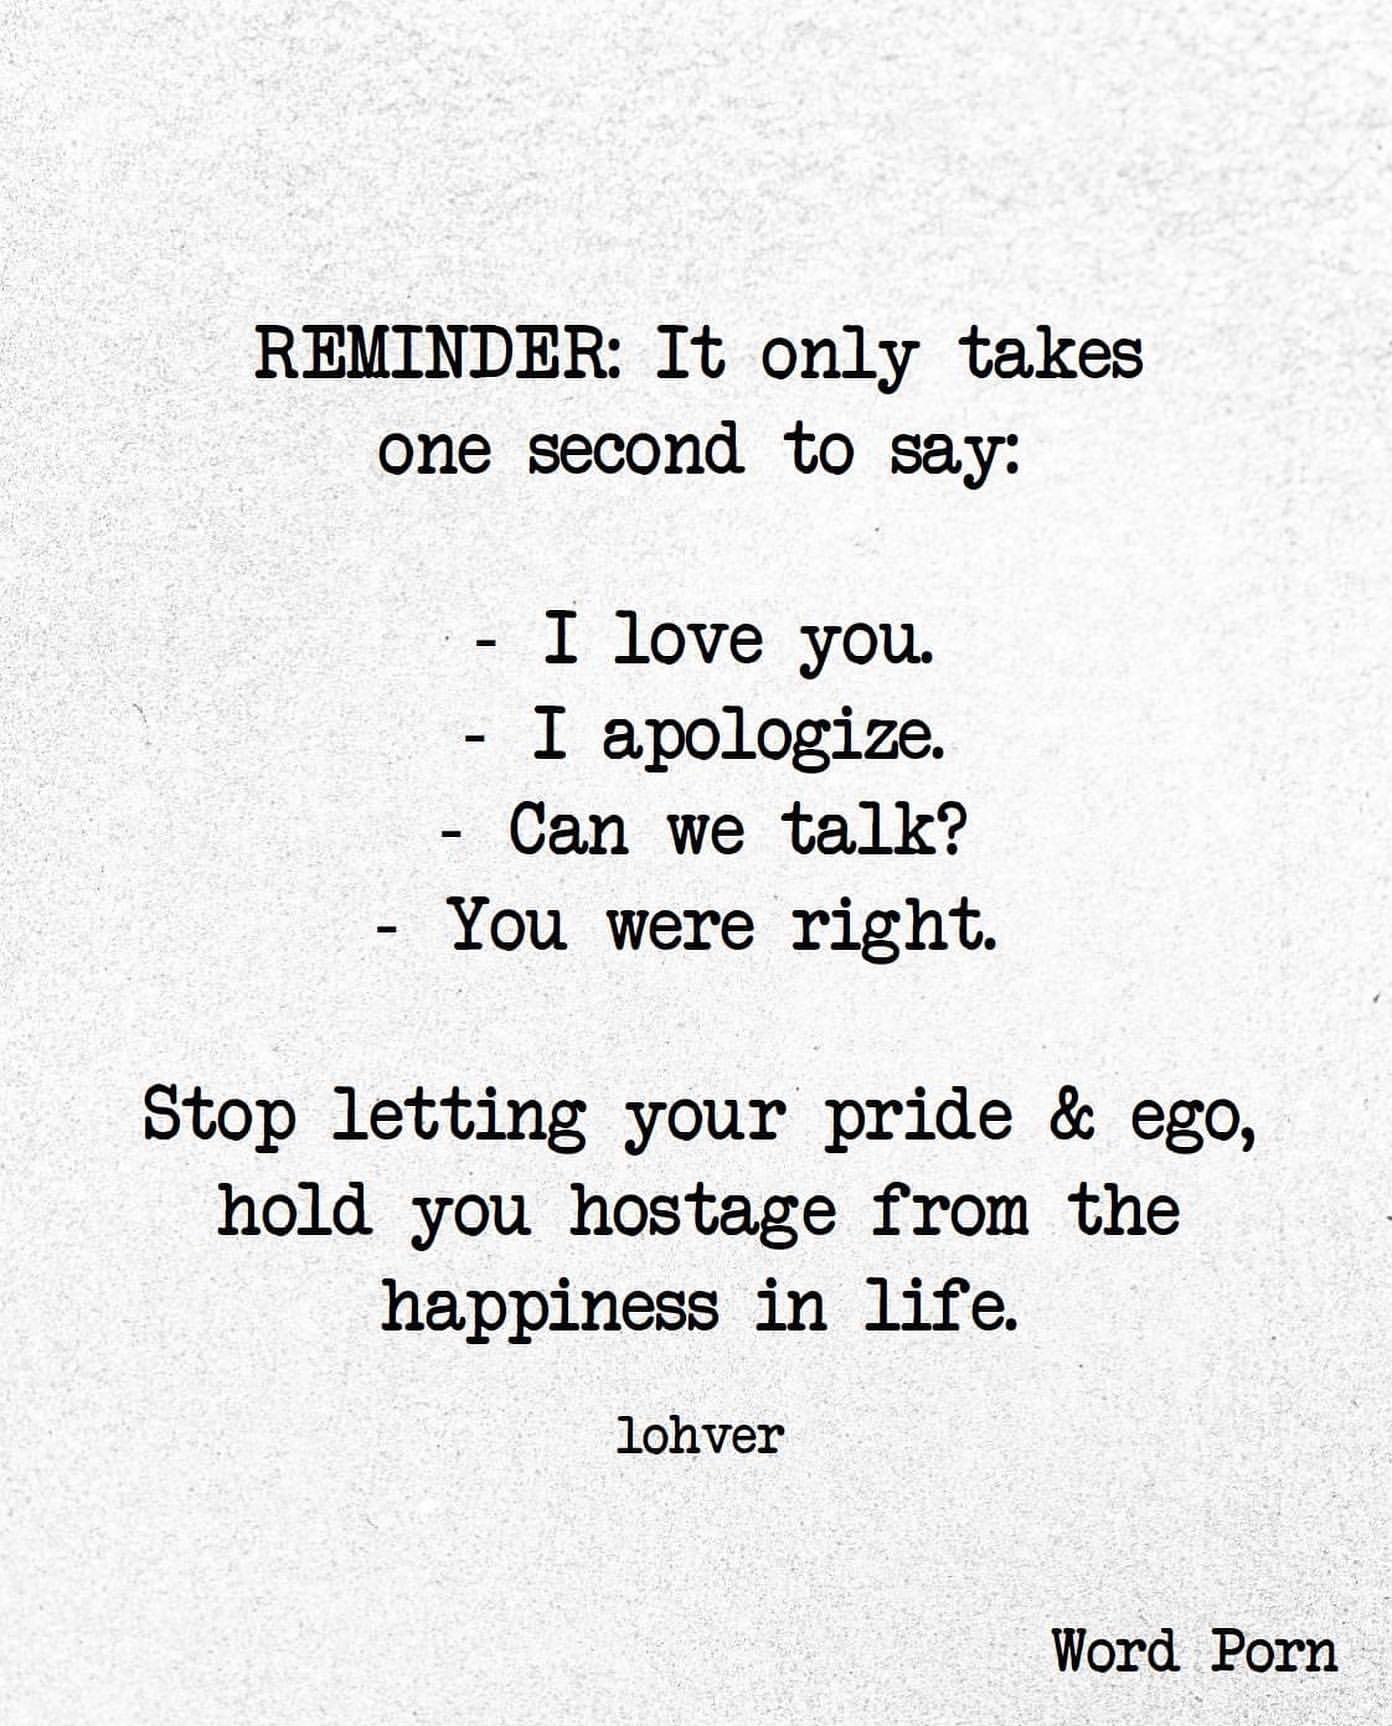 Reminder: It only takes one second to say: I love you. I apologize. Can we talk? You were right. Stop letting your pride & ego, hold you hostage from the happiness in life.